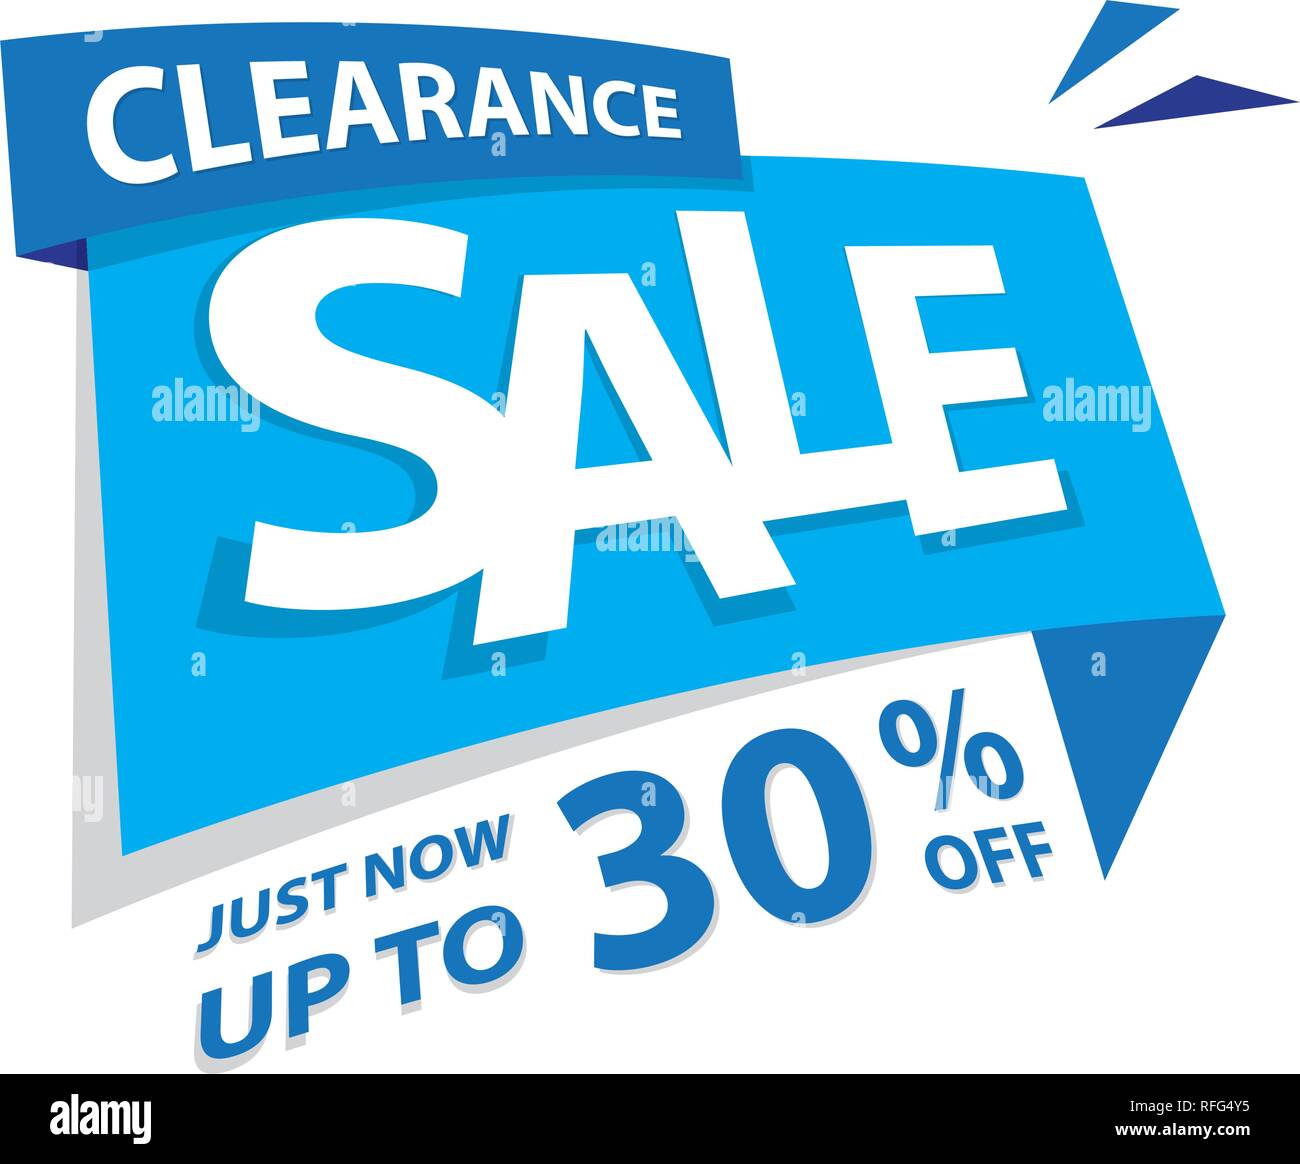 https://c8.alamy.com/comp/RFG4Y5/clearance-sale-blue-tag-30-percent-heading-design-for-banner-or-poster-sale-and-discounts-concept-vector-illustration-RFG4Y5.jpg